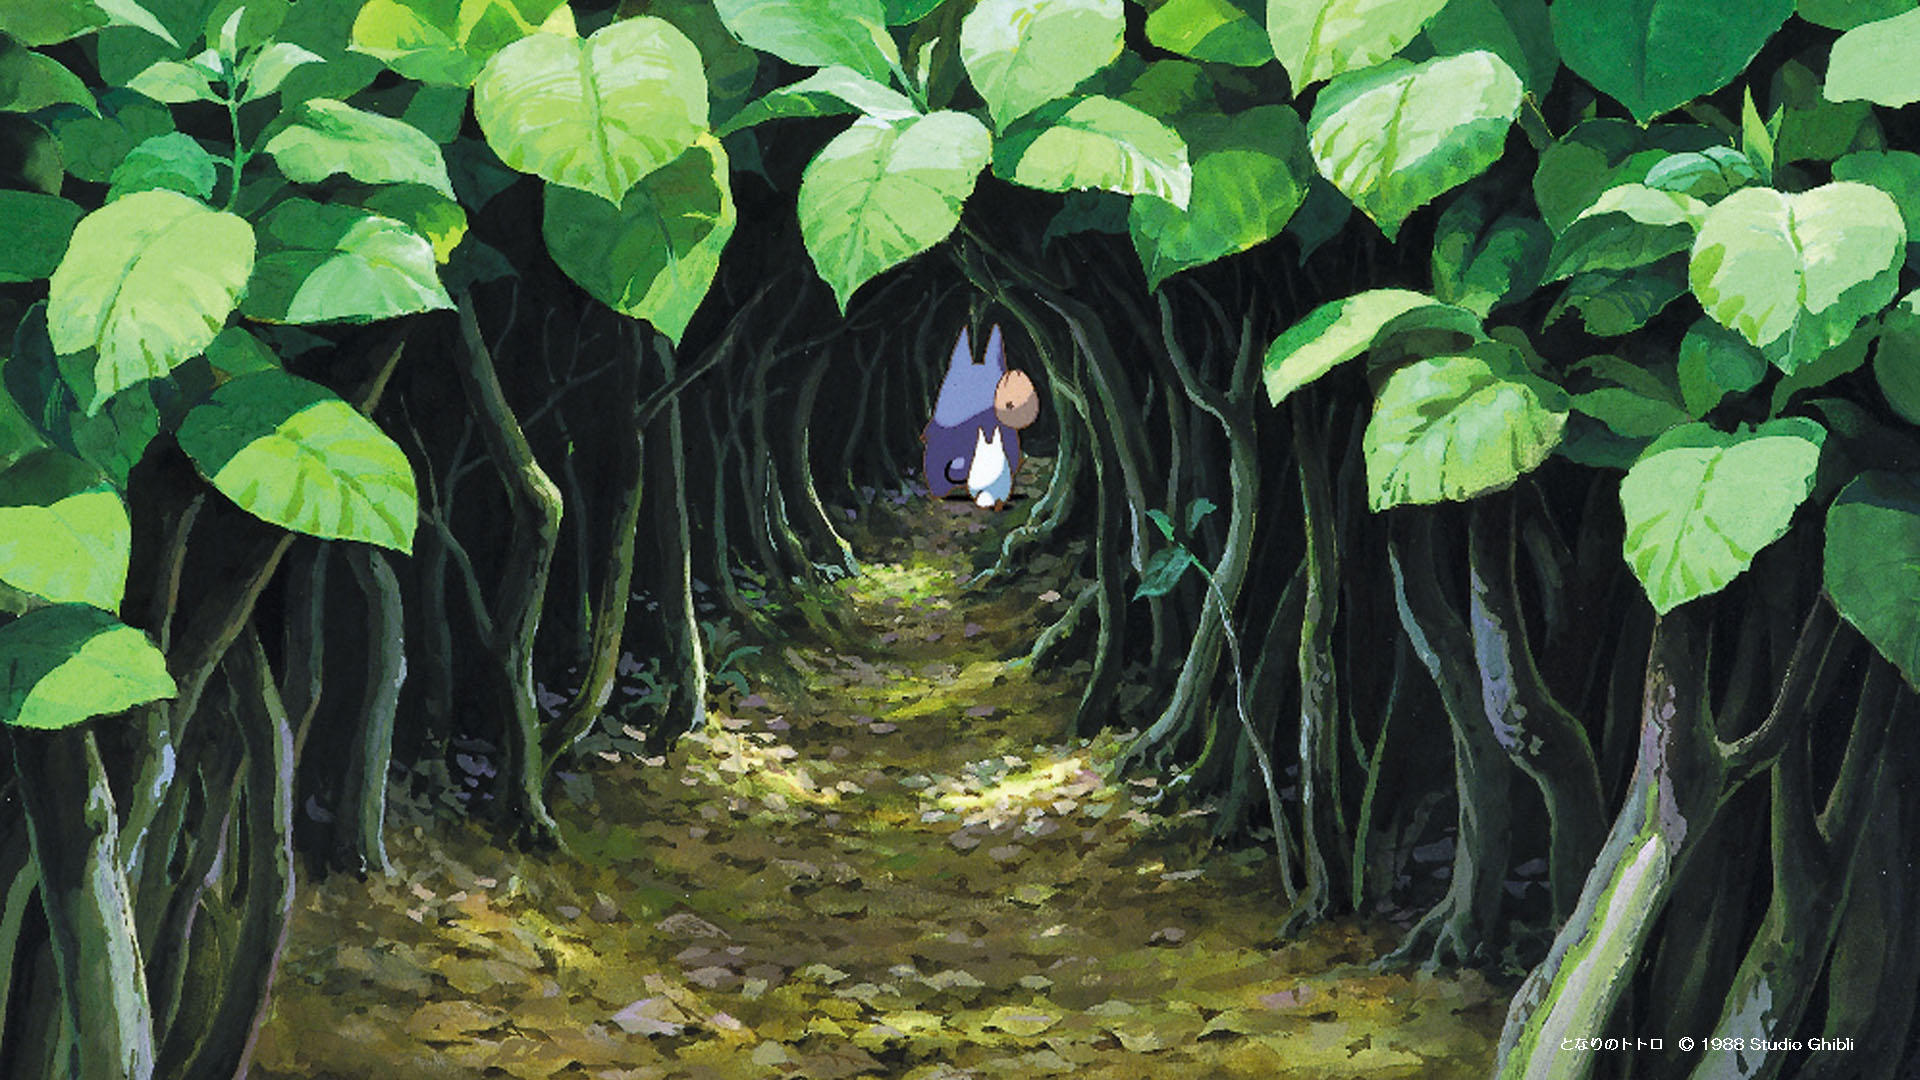 Studio Ghibli Wallpaper For Your Video Chats And